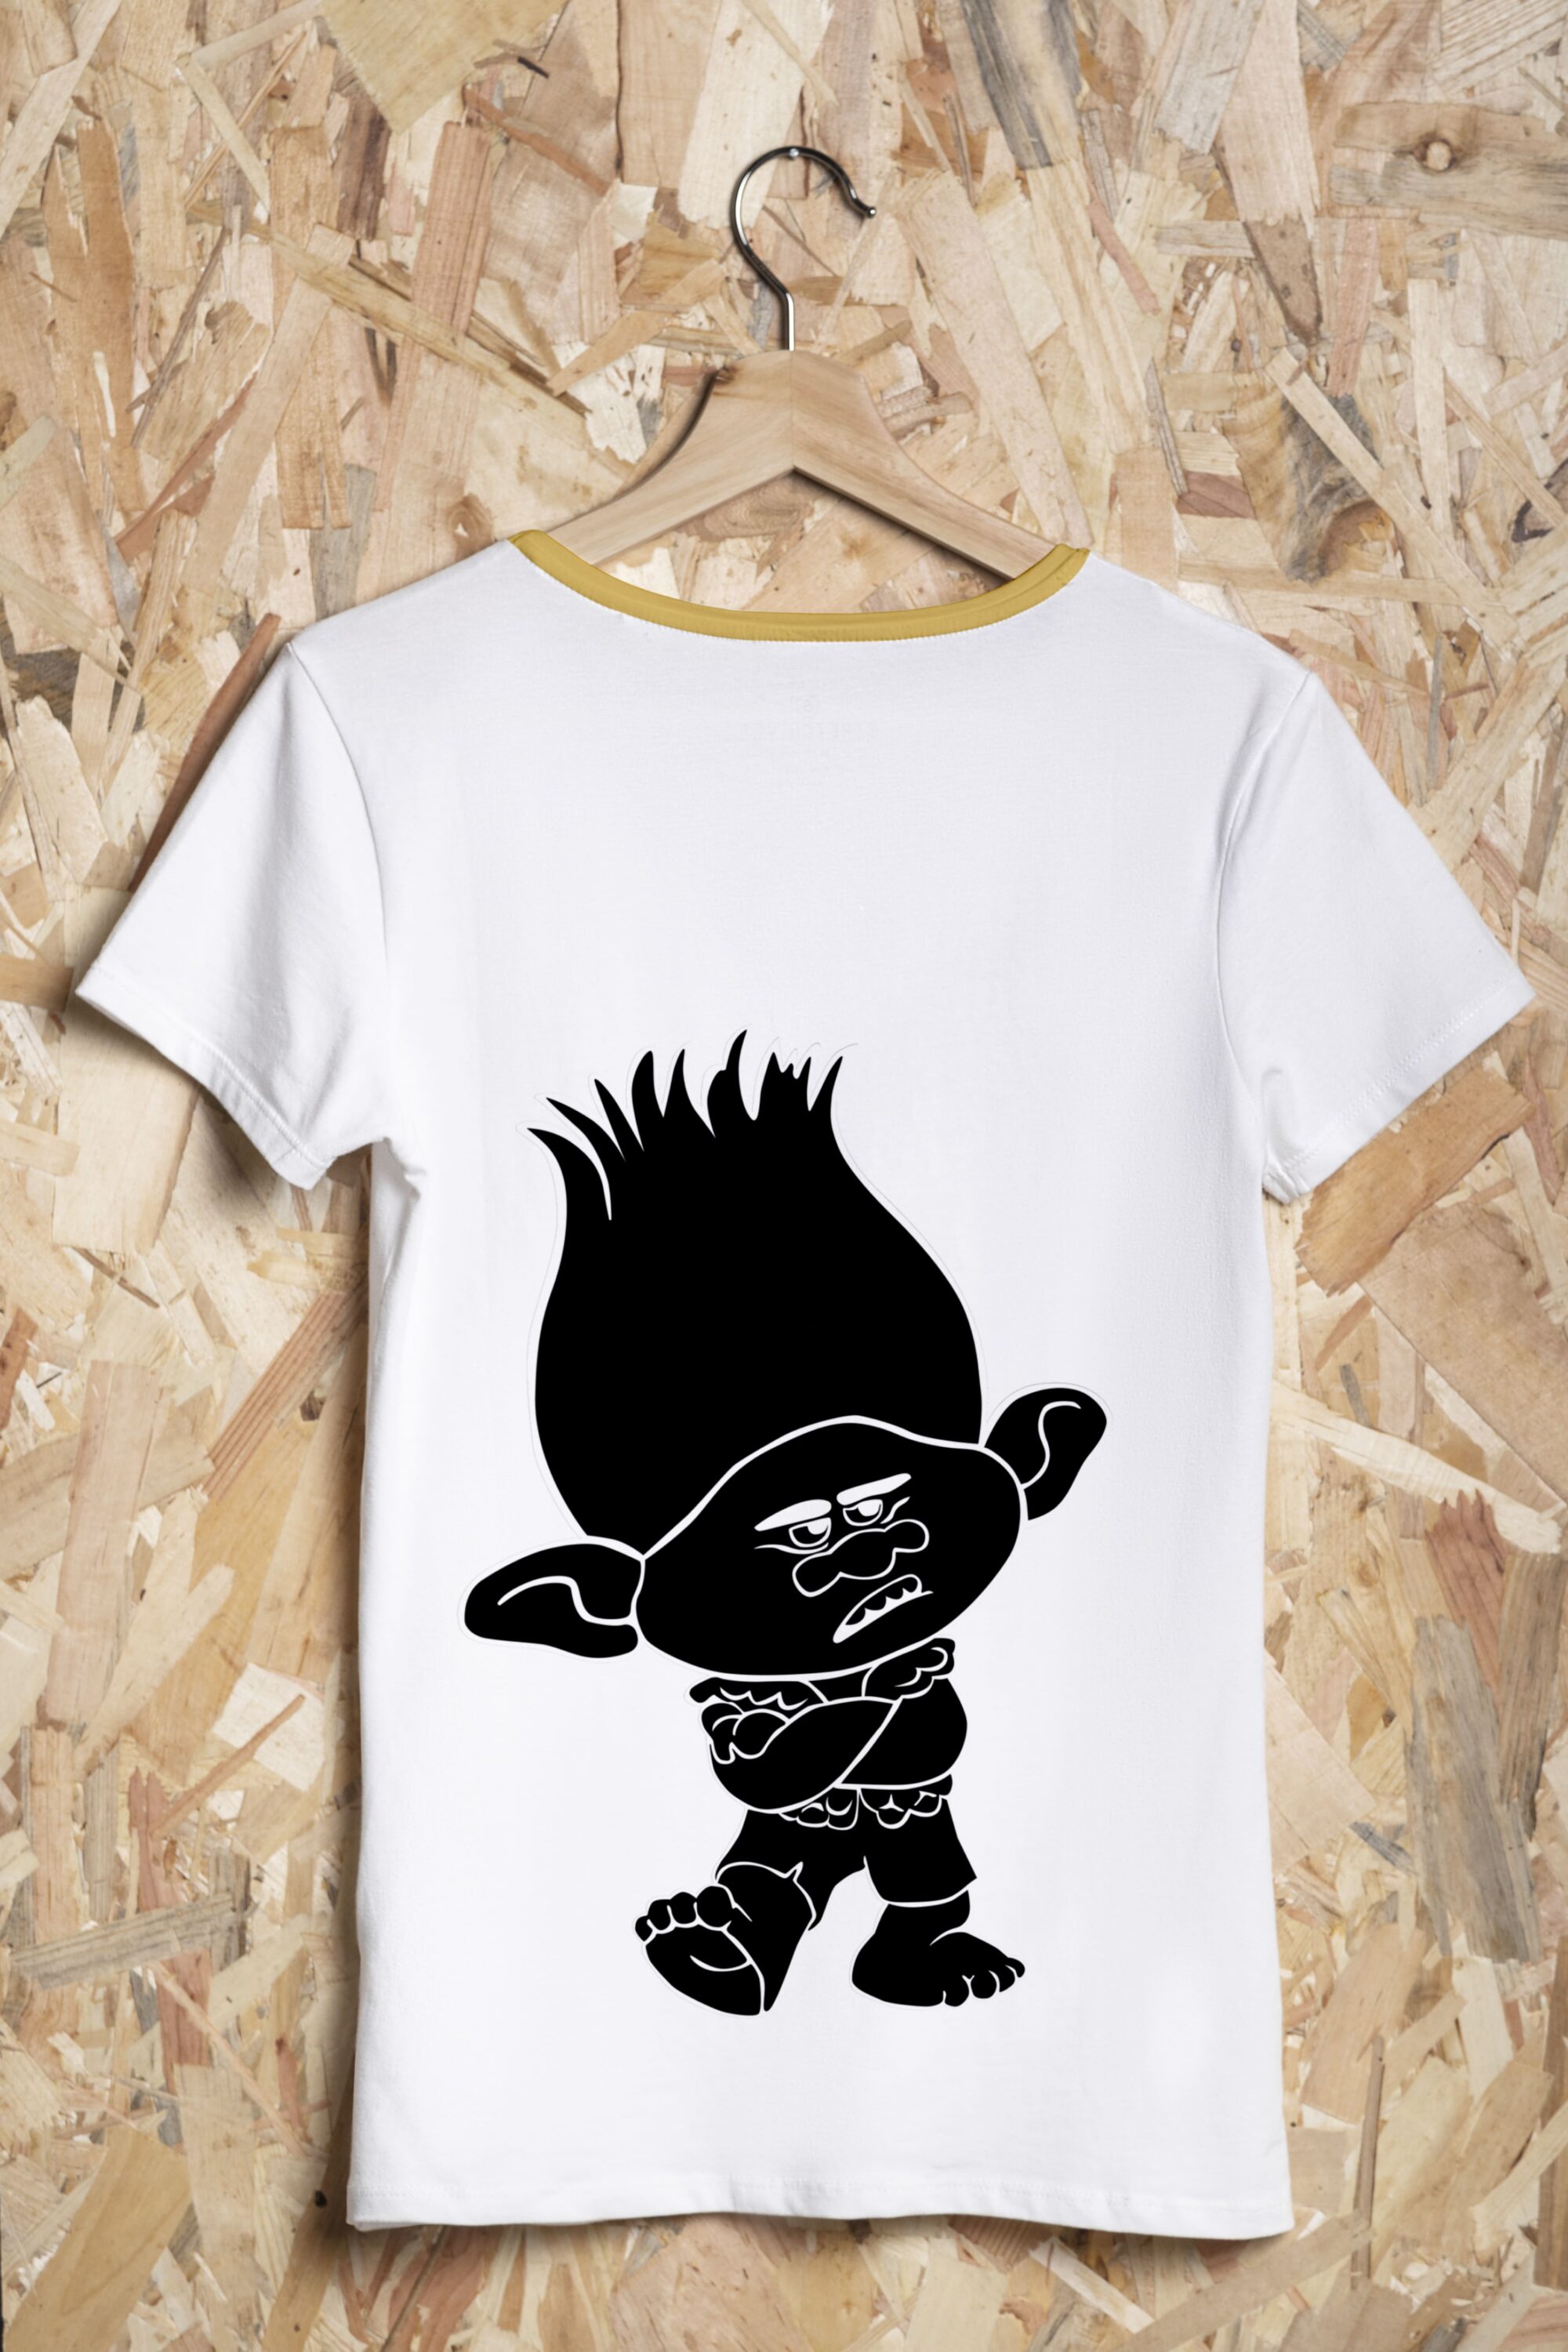 White T-shirt with dirty yellow collar and a monochrome image of a cartoon character - Branch.